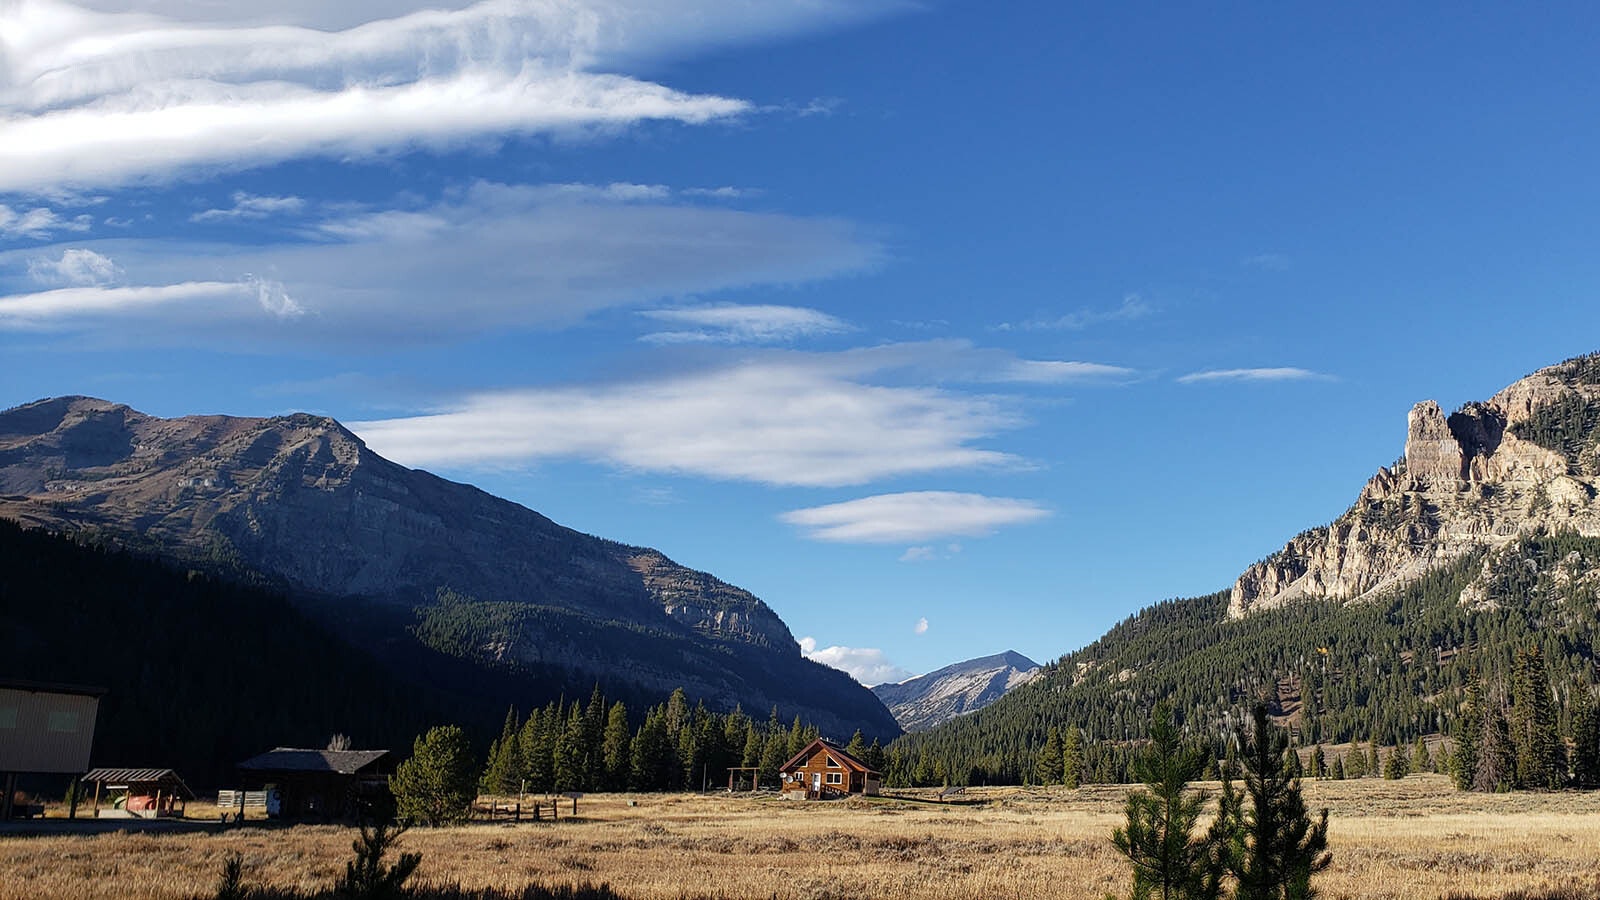 The view is amazing at Granite Creek Ranch. The caretakers' residence appears small beside the mountains.